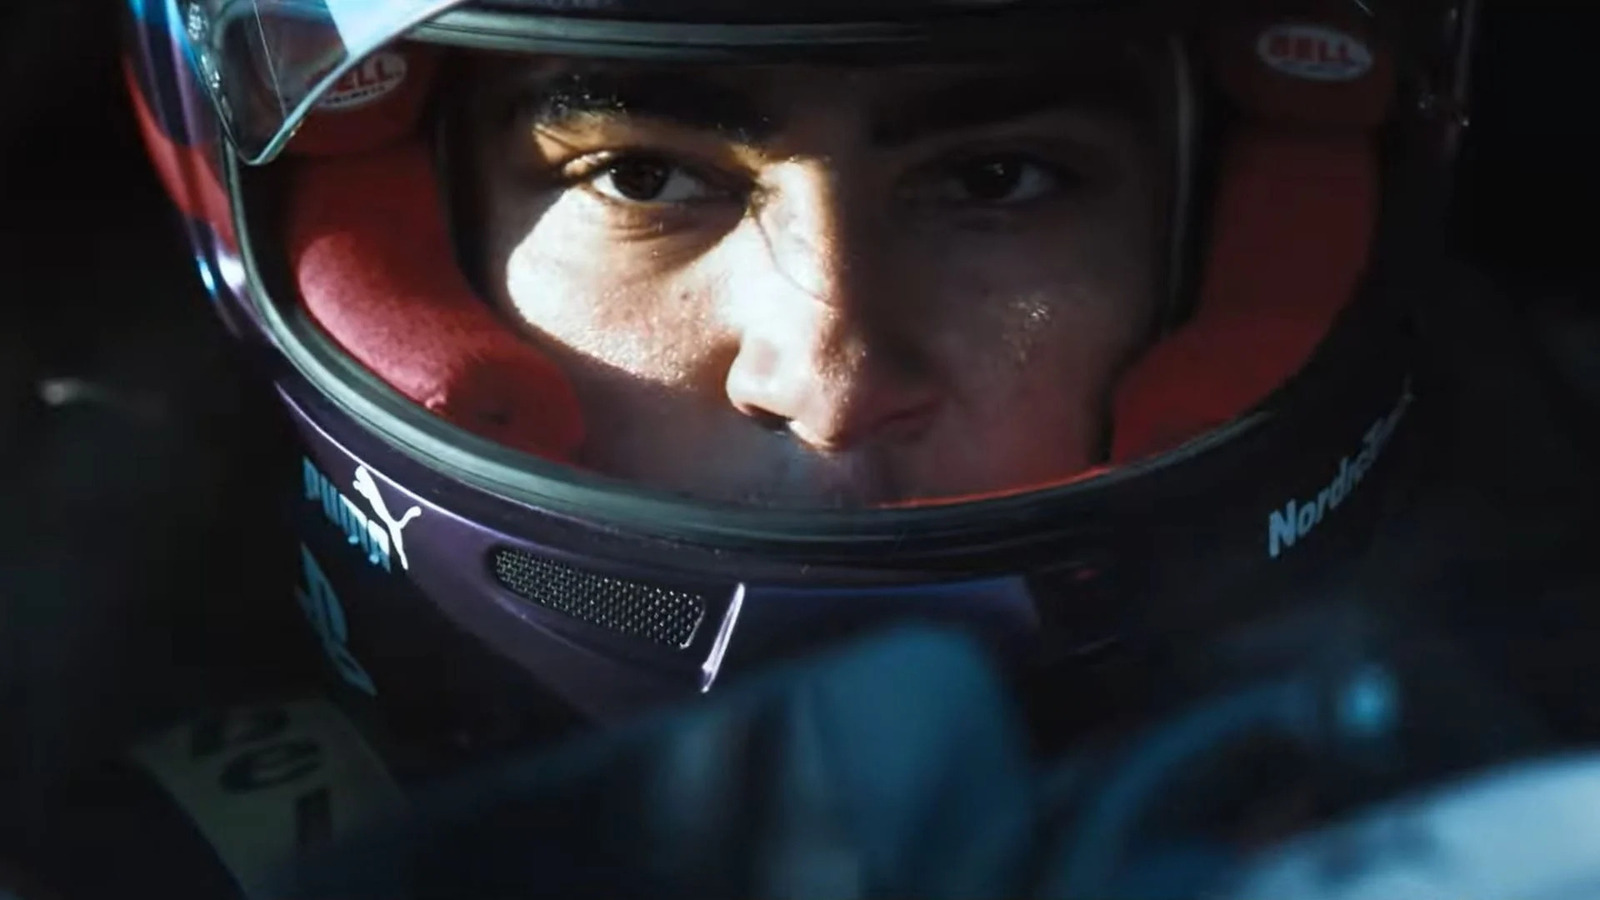 Gran Turismo Trailer: The Video Game Becomes An Unbelievable True Story